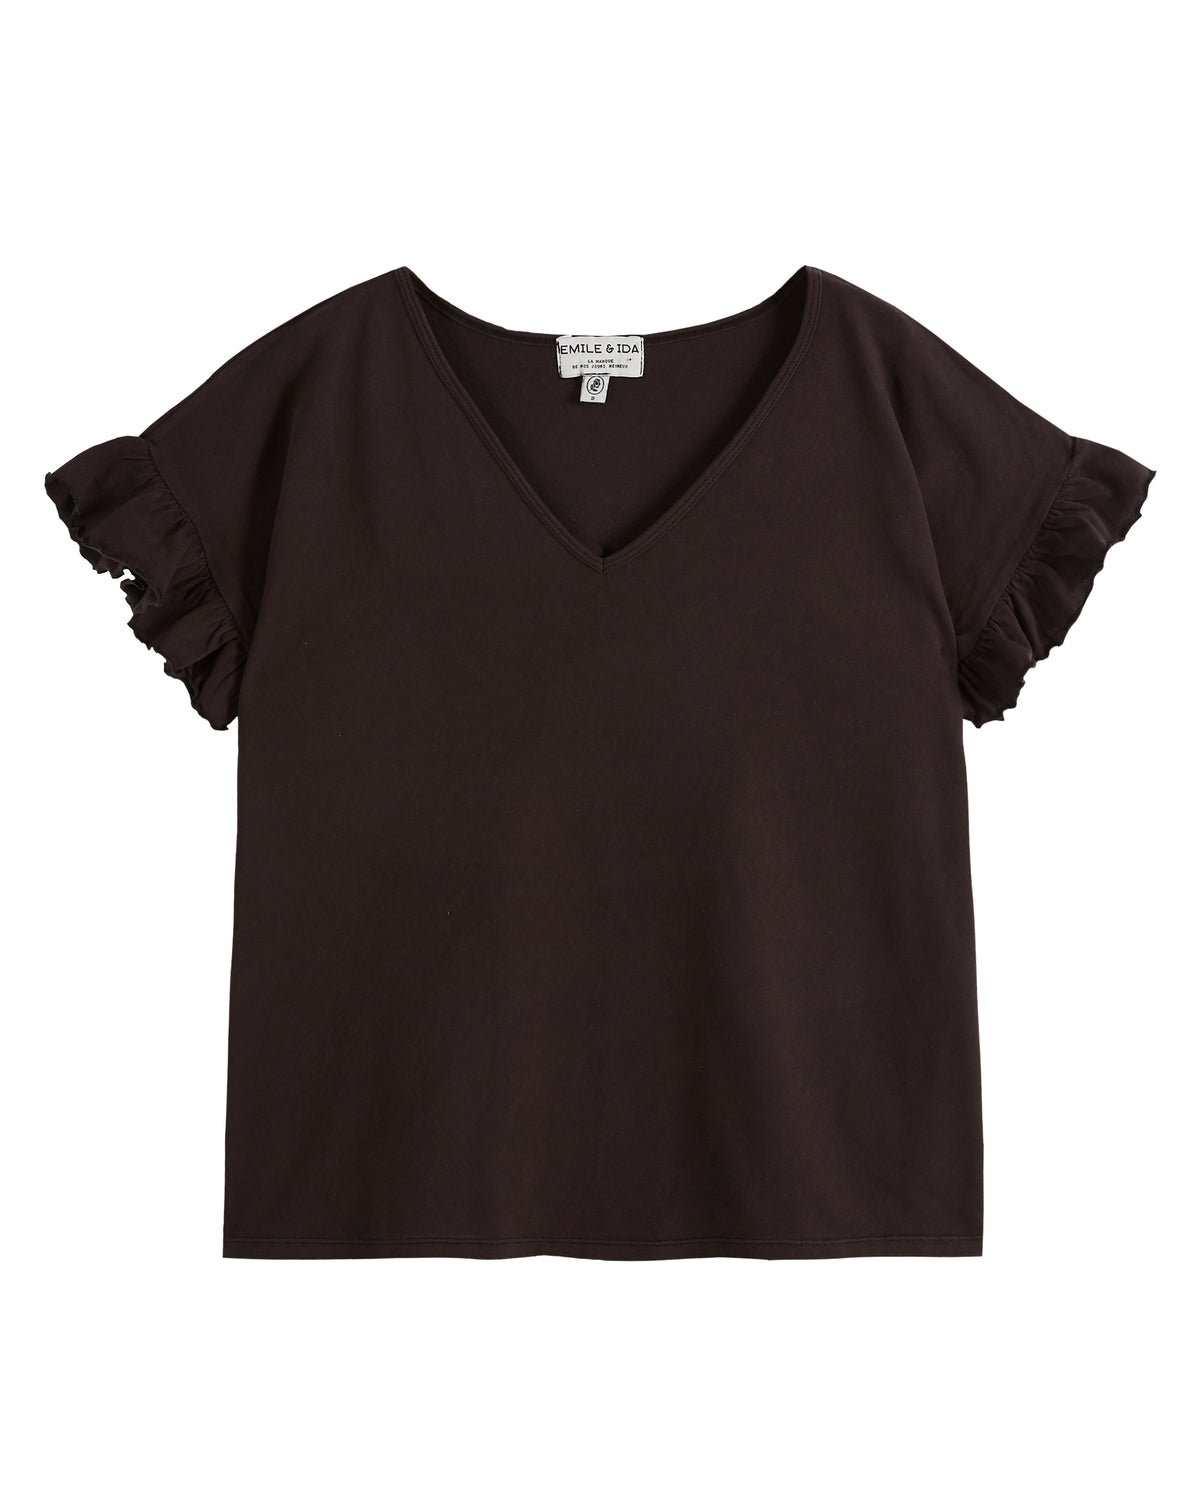 Washed black V neck tee with grown on short sleeves and ruffle cuffs